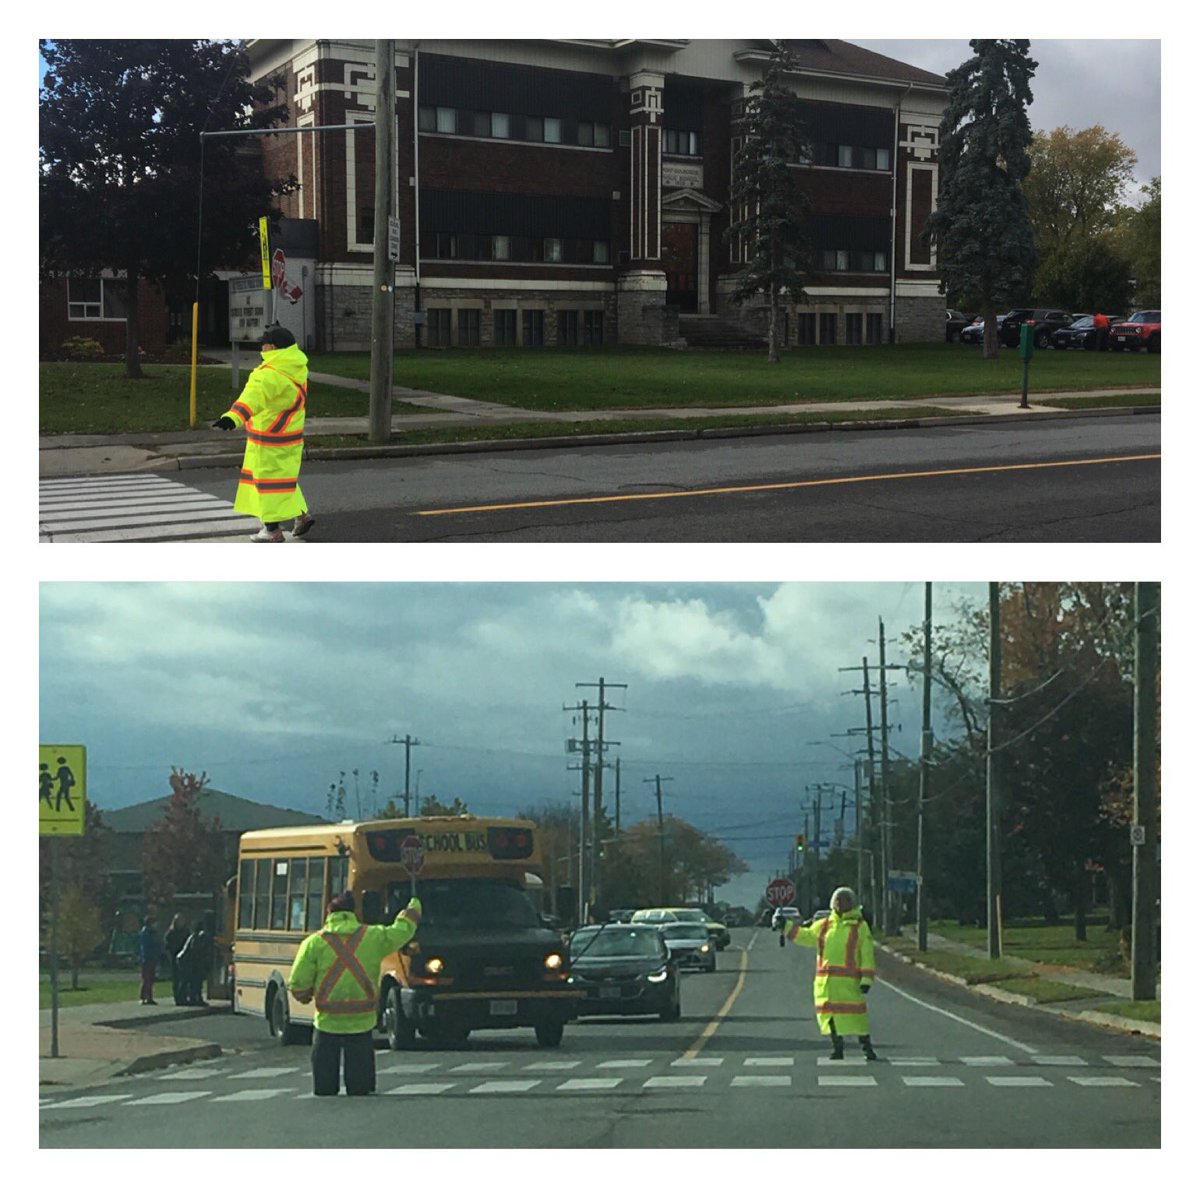 A special thank you to all the School Crossing Guards out there who  assist with keeping our children safe #communityheros Everyone plays a role  in building a safer community #knowyourrole #DriveSafe #publicsafety